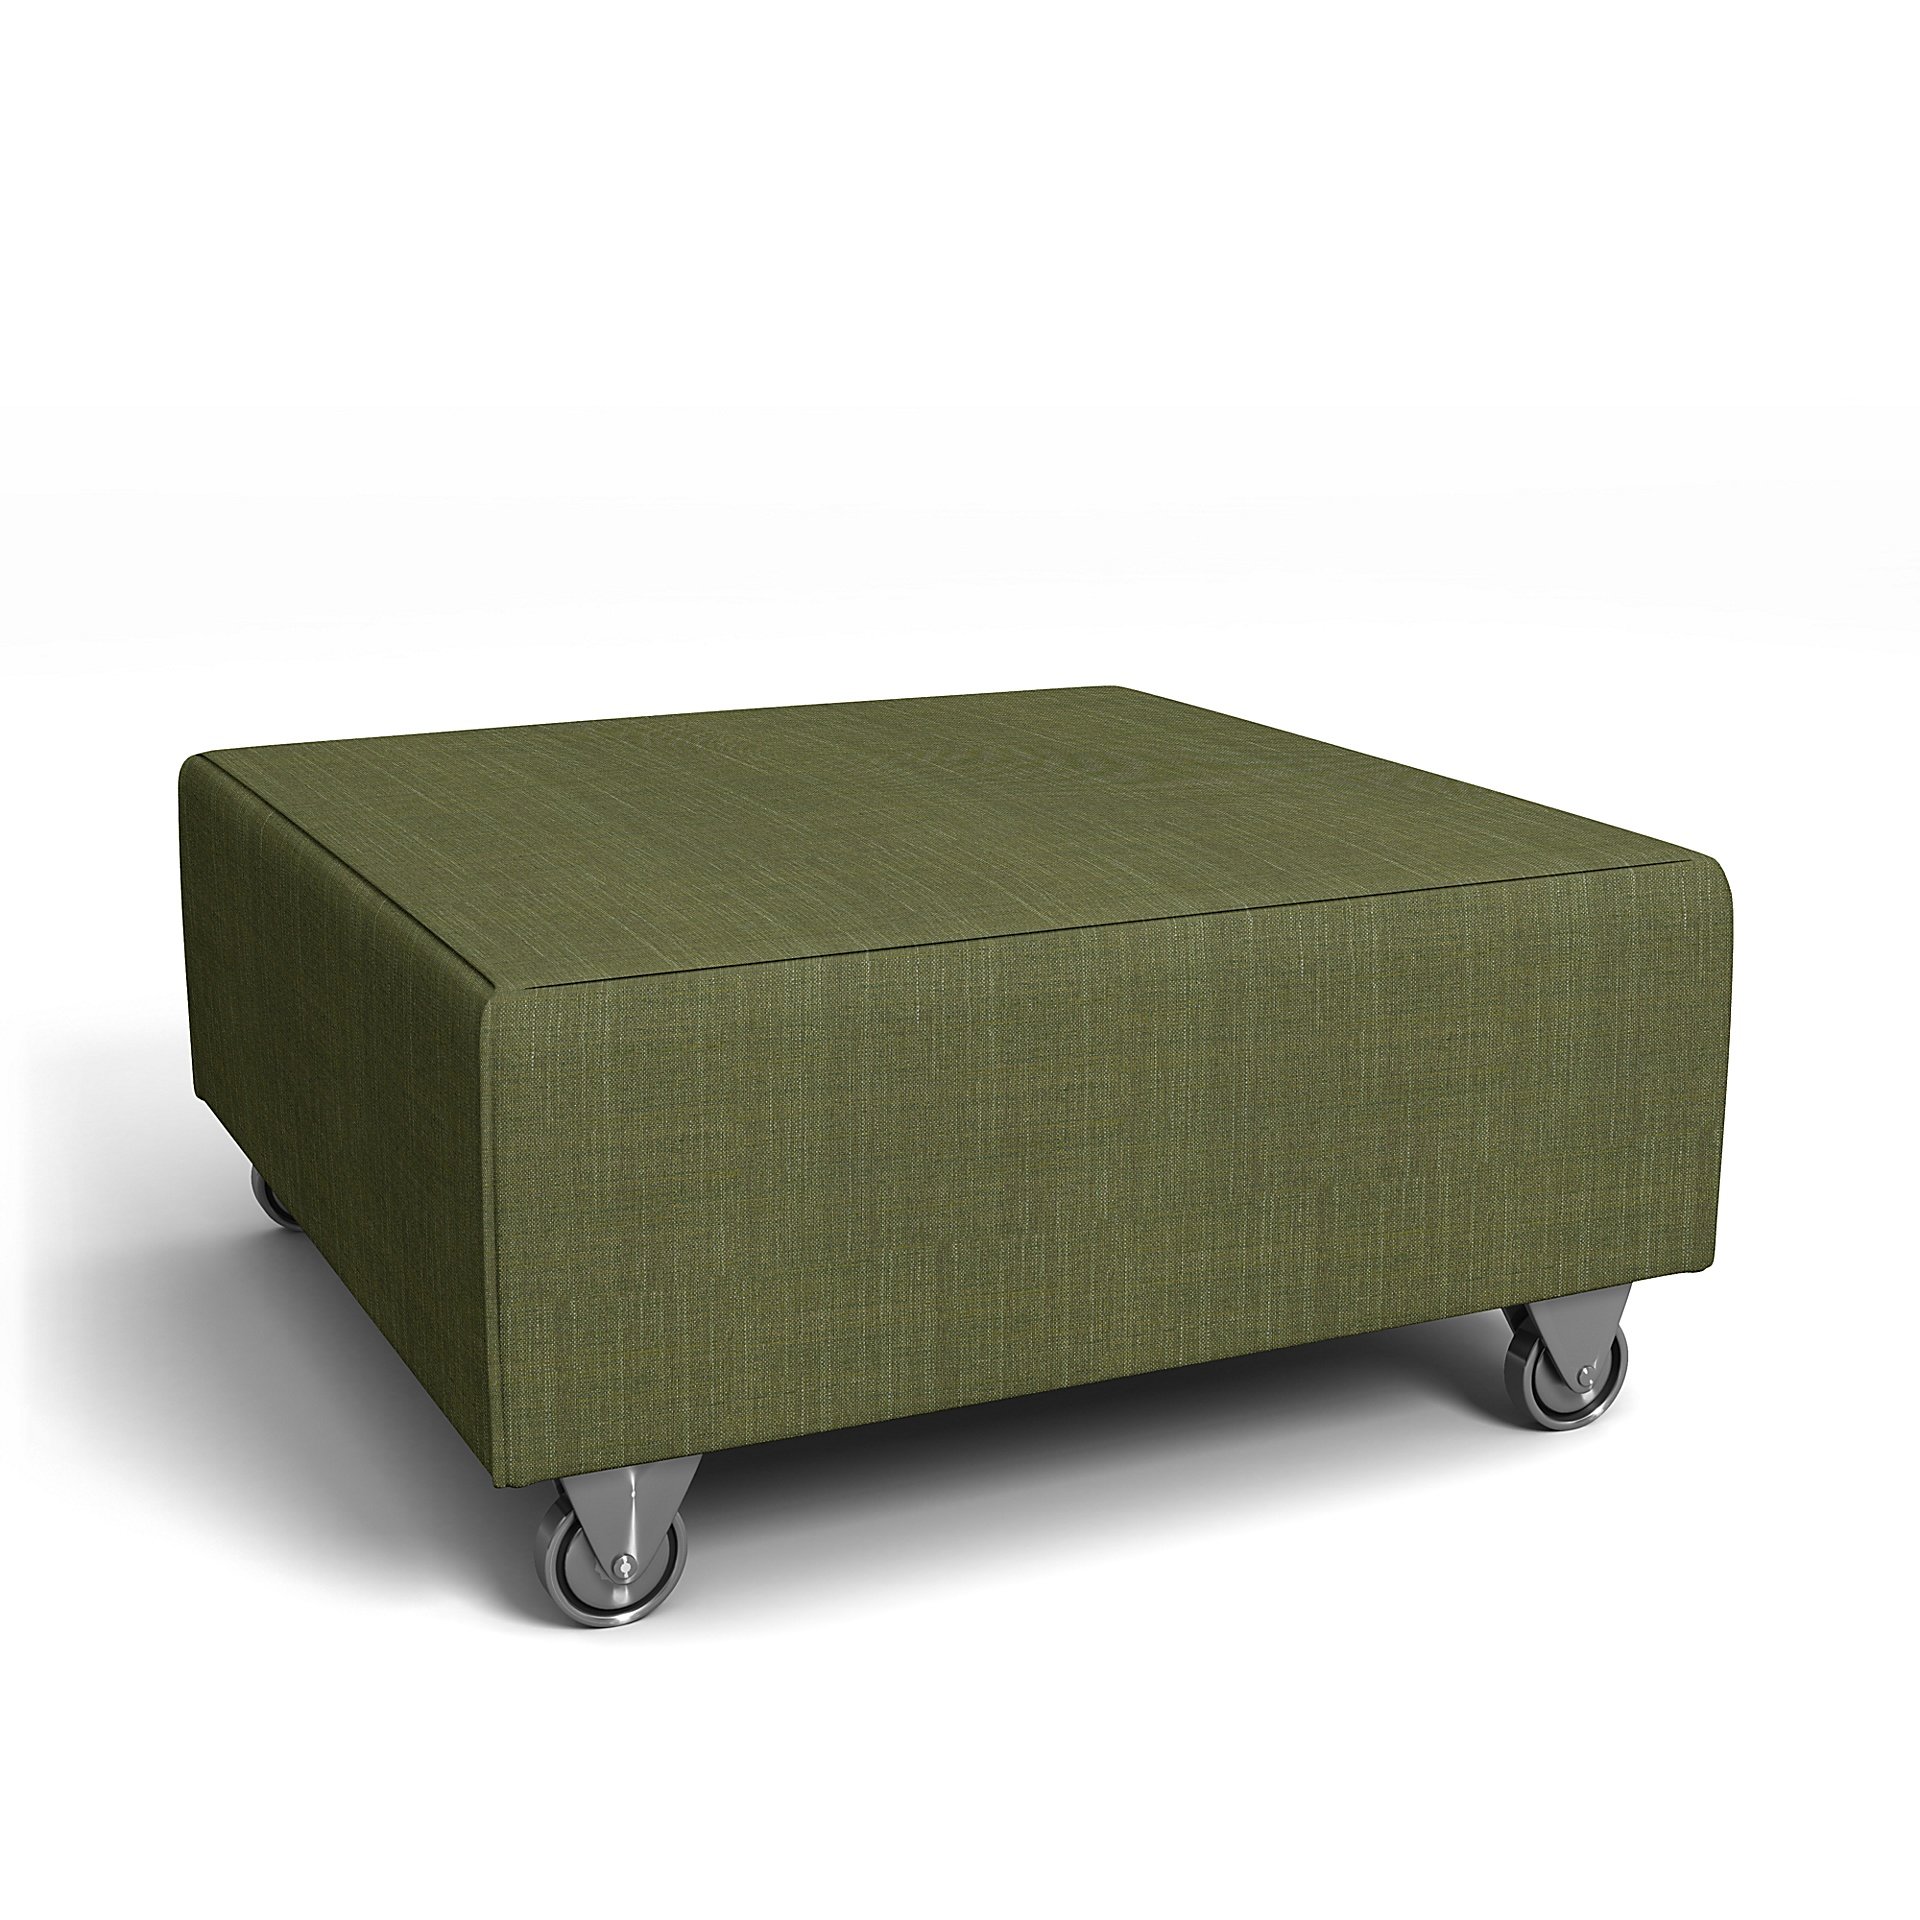 IKEA - Falsterbo Footstool Cover, Moss Green, Boucle & Texture - Bemz